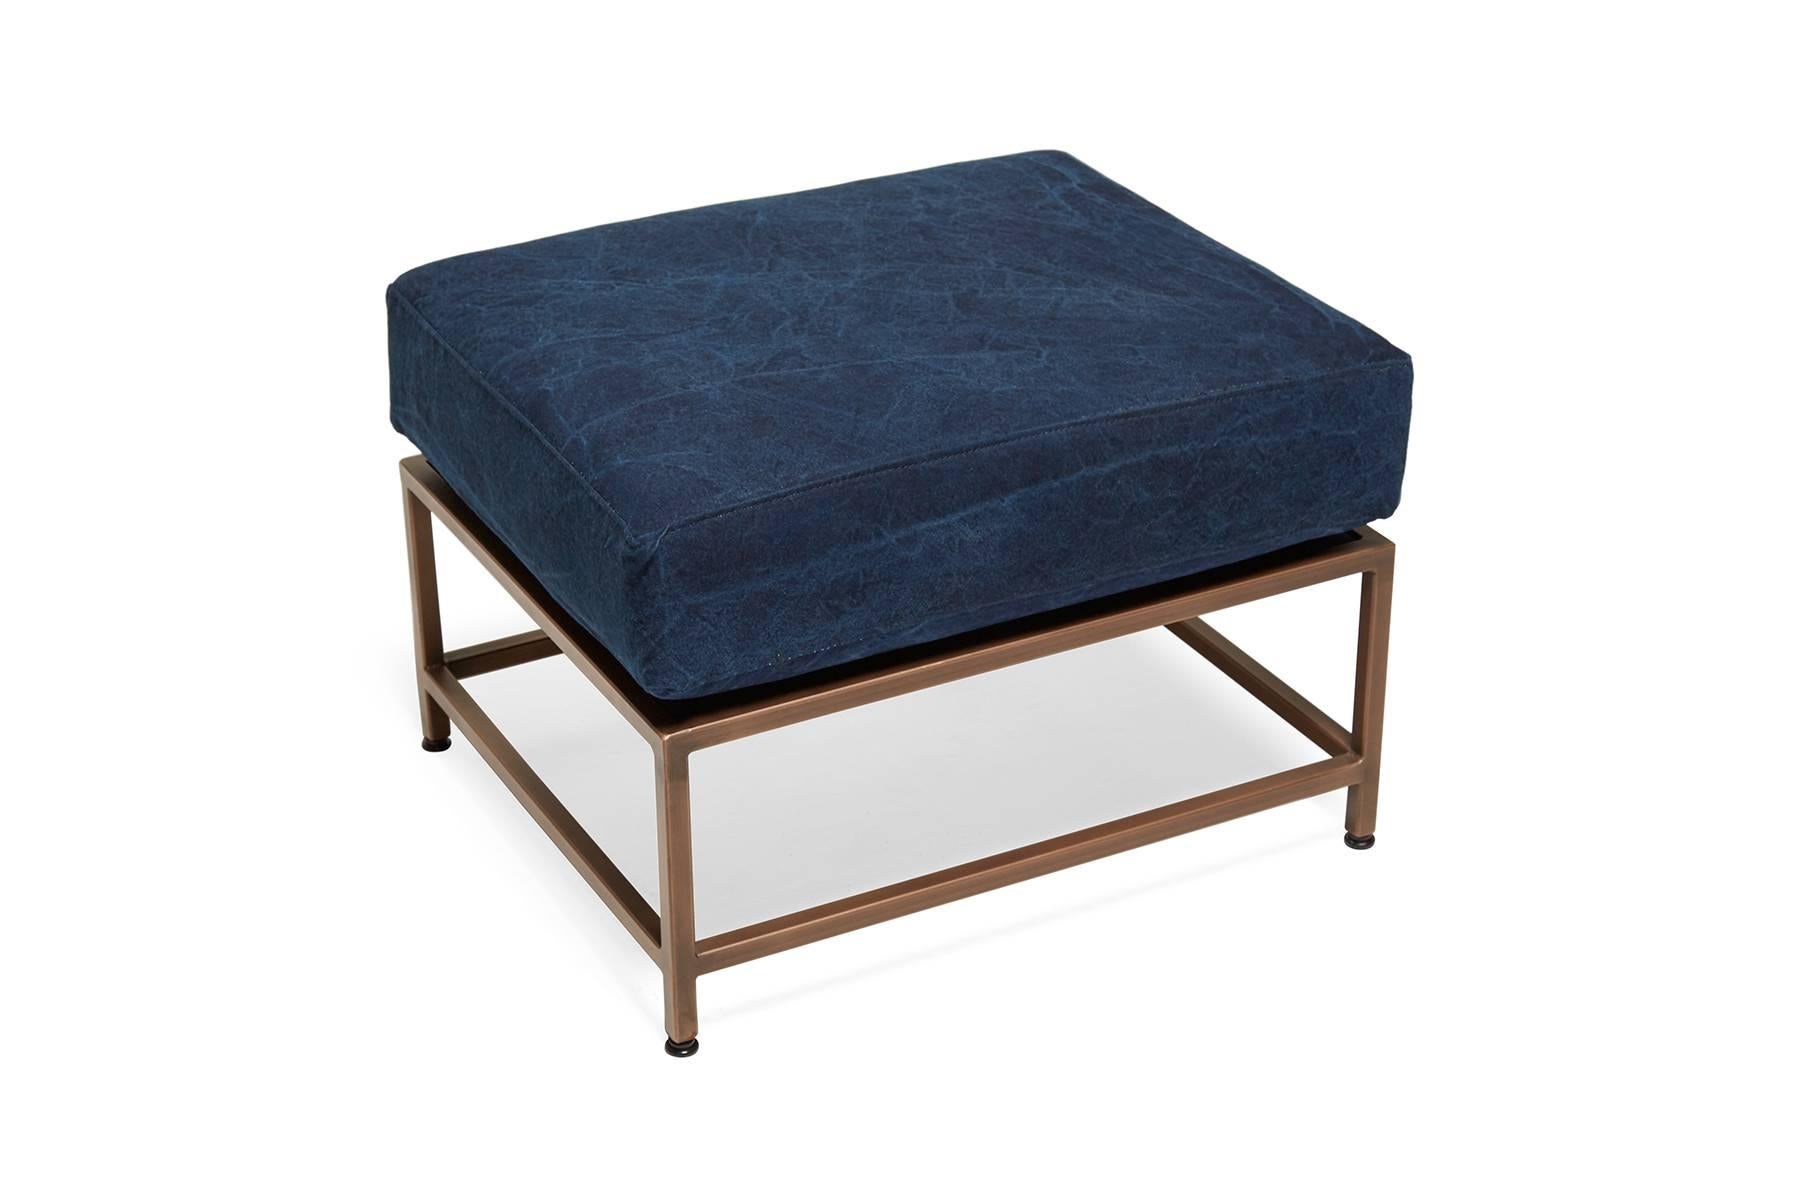 Inspired by a worn-in pair of jeans and created alongside the team at Simon Miller USA, this Ottoman has naturally dyed indigo cotton canvas upholstery atop an antique copper frame. Each piece of canvas is hand-dyed and has unique texture and color